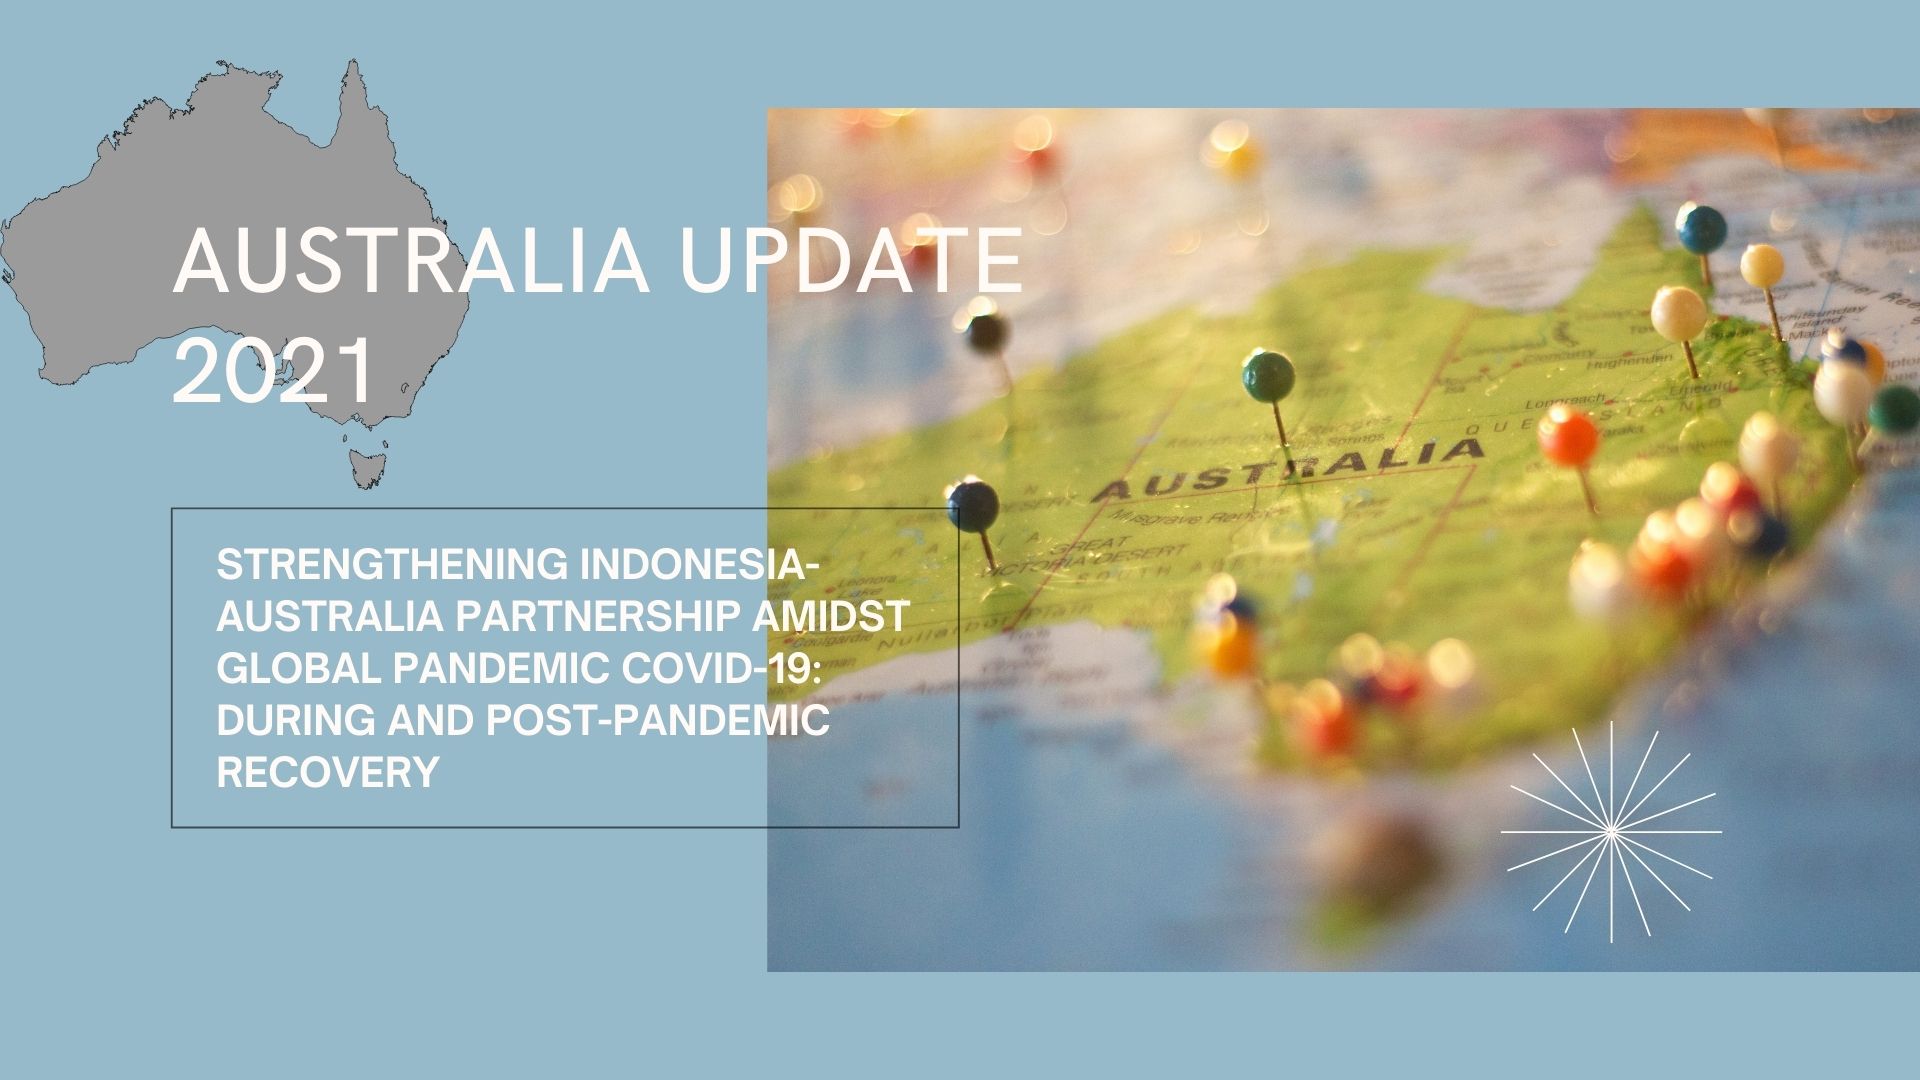 Australia Update 2021: Strengthening Indonesia-Australia Partnership Amidst Global Pandemic Covid-19: During and Post-Pandemic Recovery